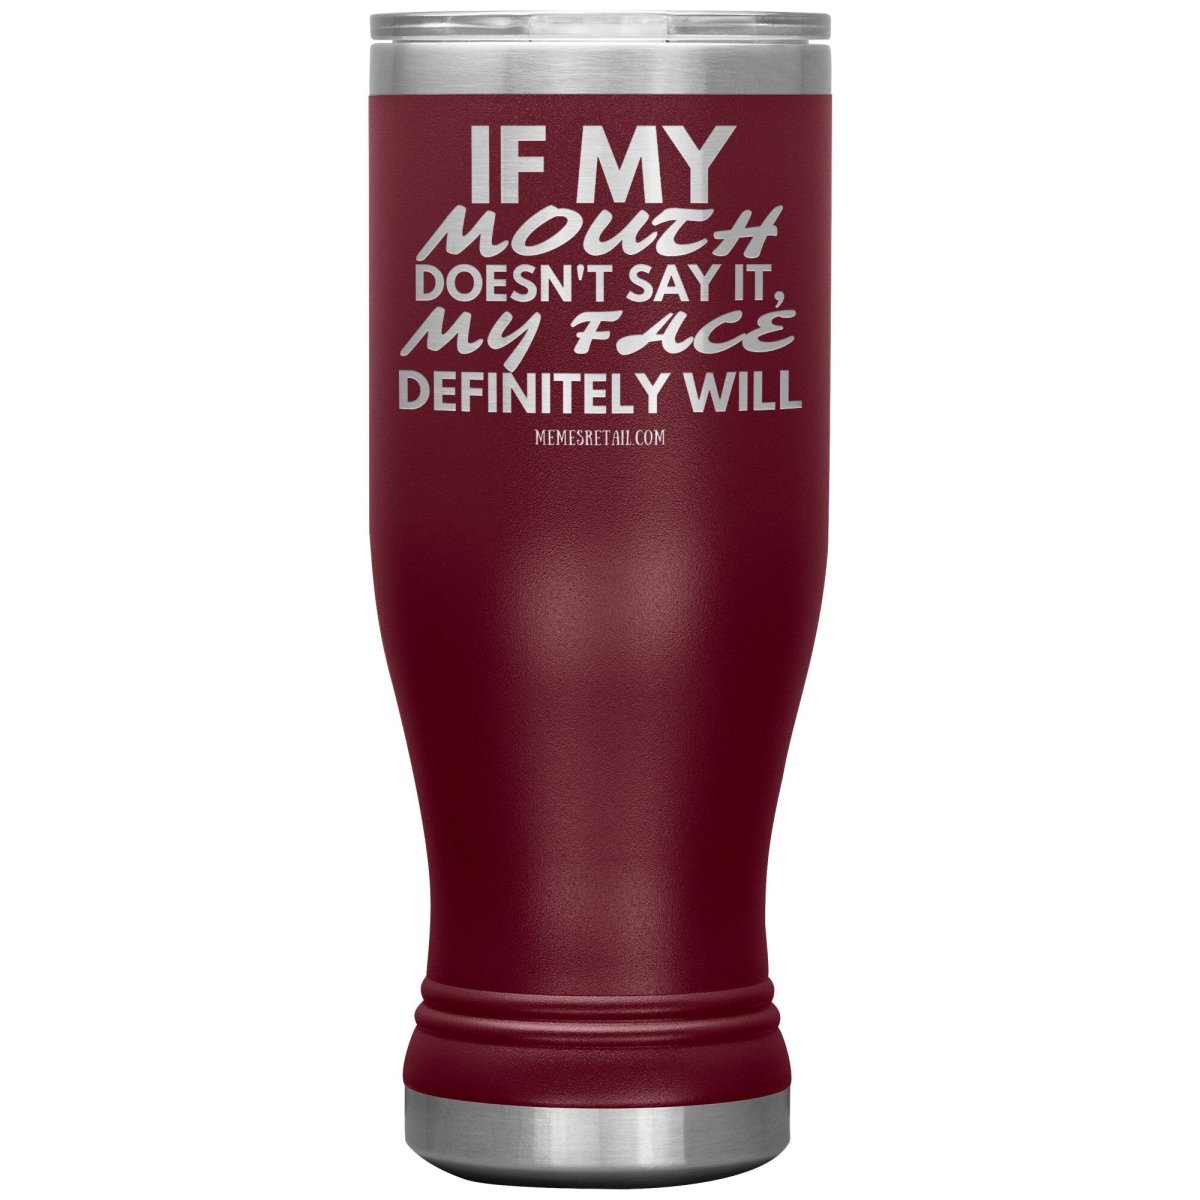 If my mouth doesn't say it, my face definitely will Tumblers, 20oz BOHO Insulated Tumbler / Maroon - MemesRetail.com